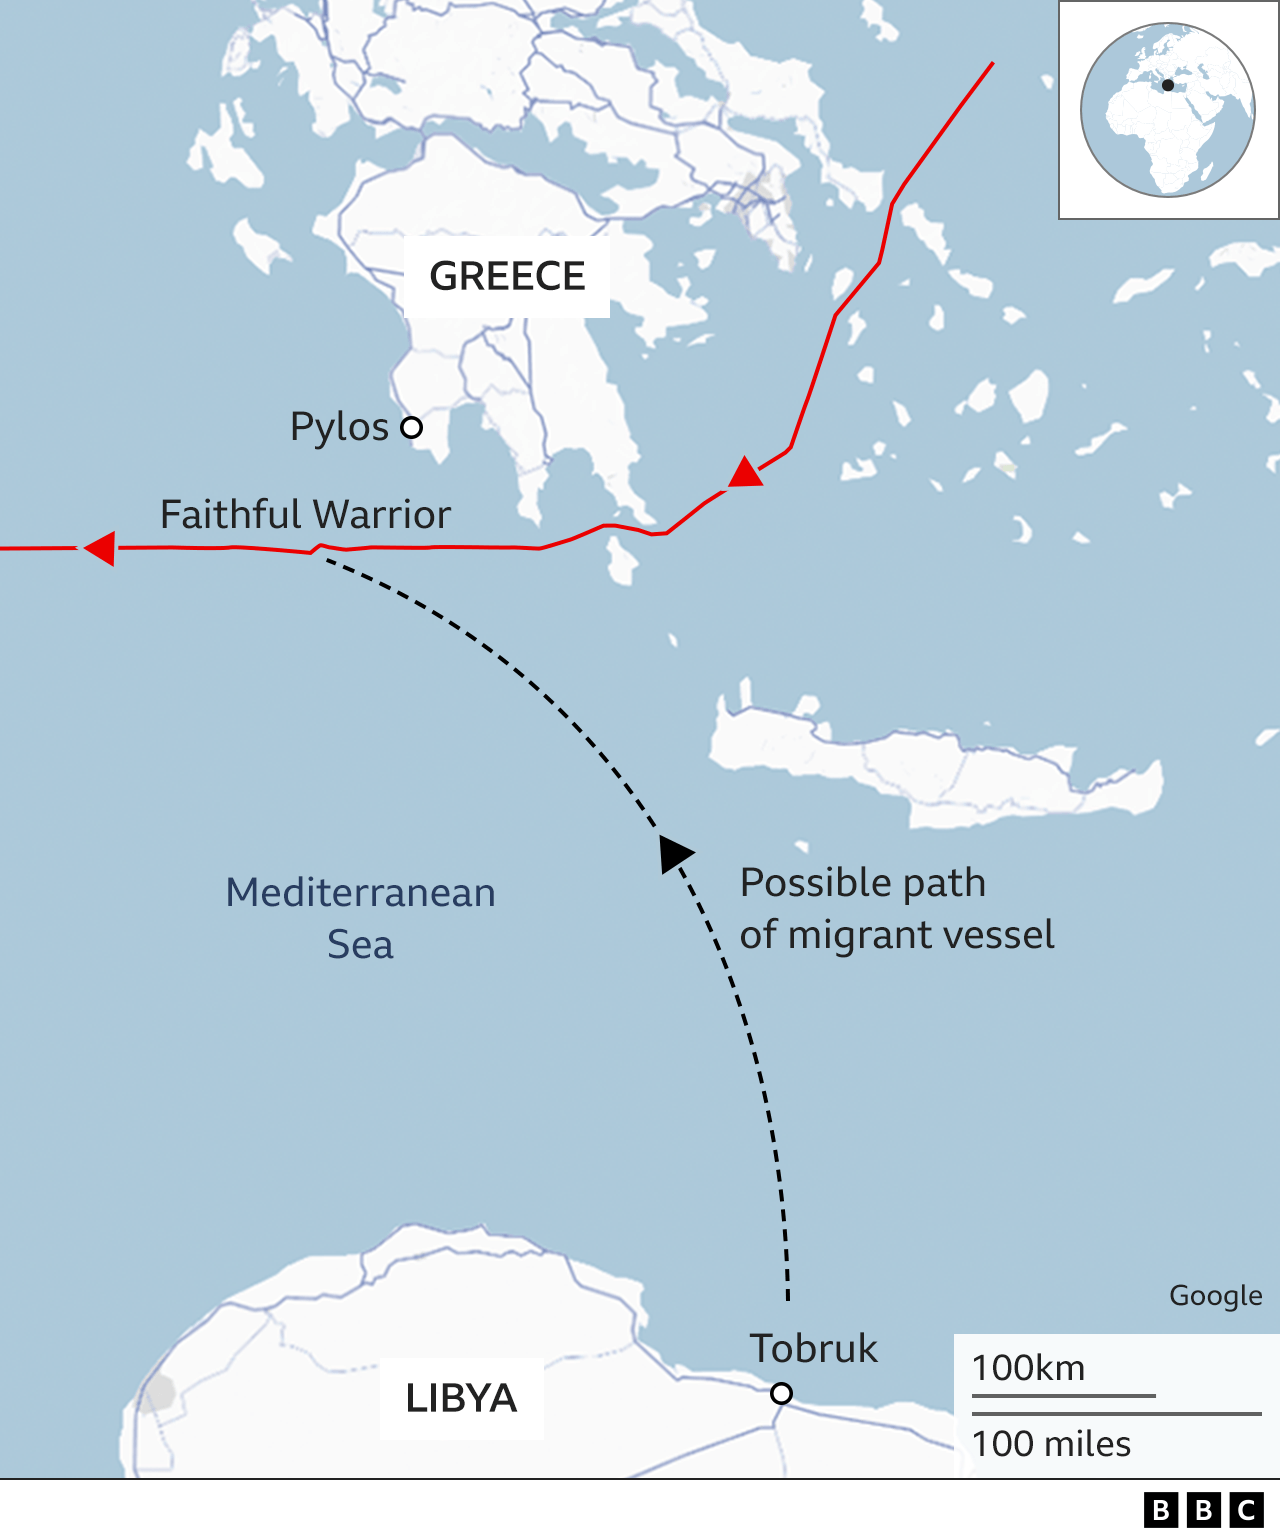 A map of a section of the Mediterranean Sea showing the possible route taken by the migrant boat off the coast of Libya, near the city of Tobruk. The possible route shows the last approximate location of the boat before it sunk and the path taken by the Faithful Warrior, which had made contact with the boat. Also shown is the Greek port city of Pylos..